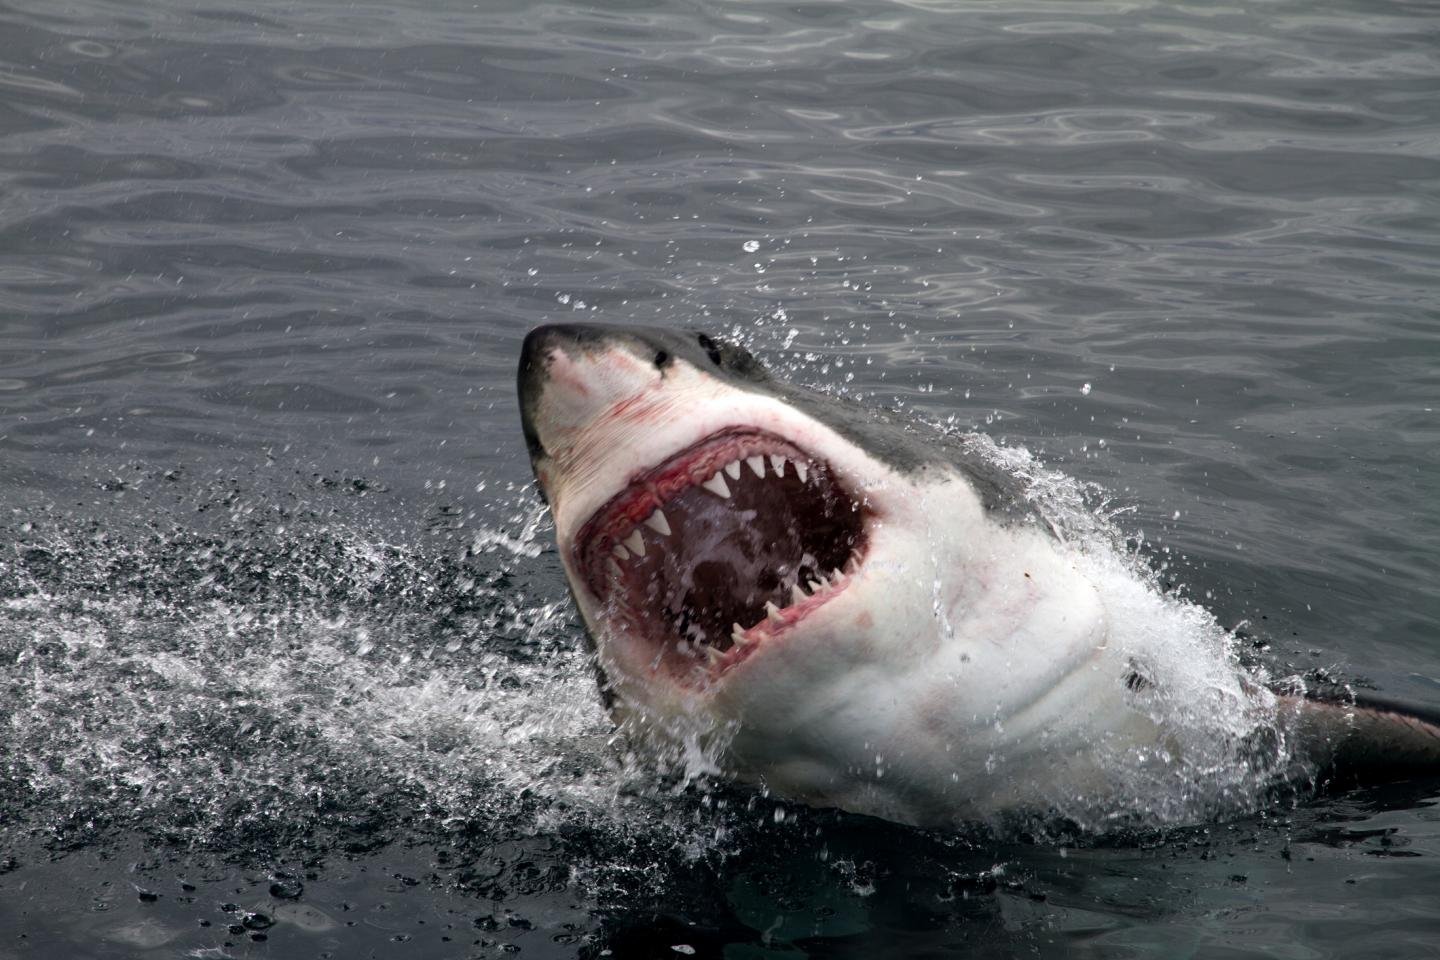 Sharks can transfer both their upper and lower jaws.